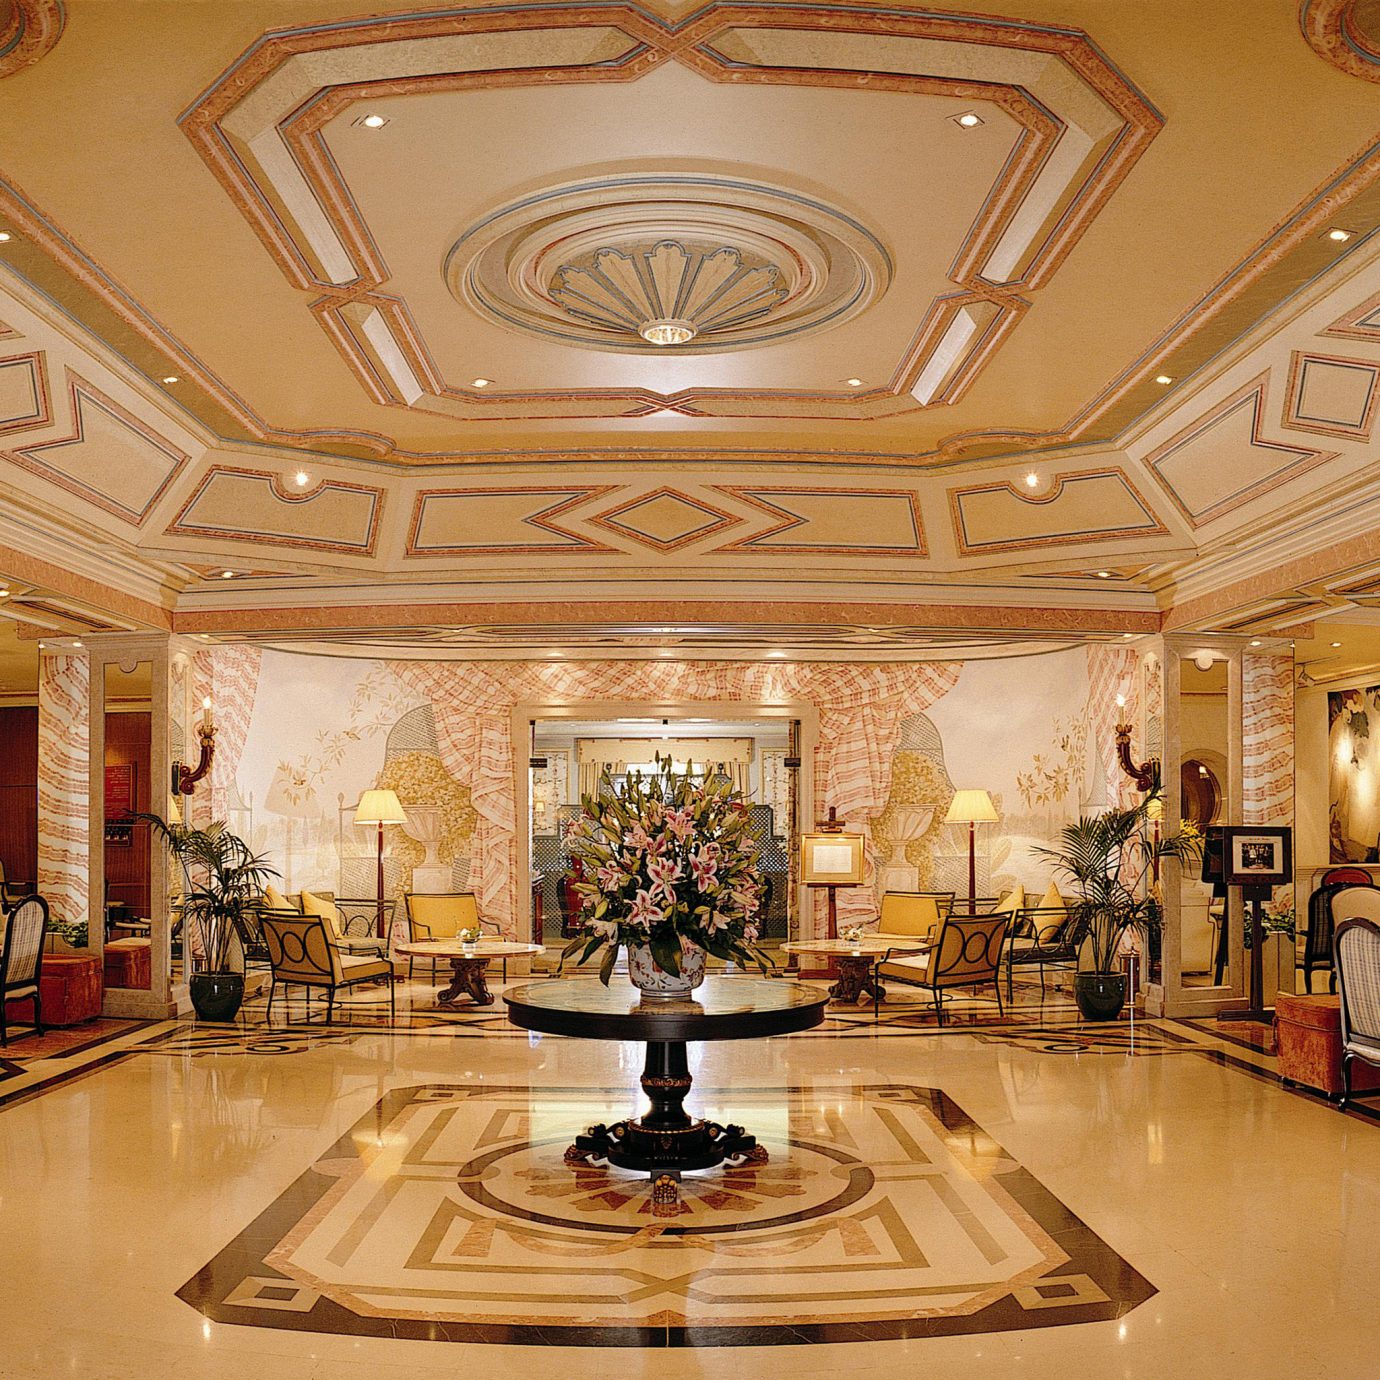 Elegant Historic Lobby Luxury building palace mansion hall ballroom ancient history tourist attraction chapel synagogue